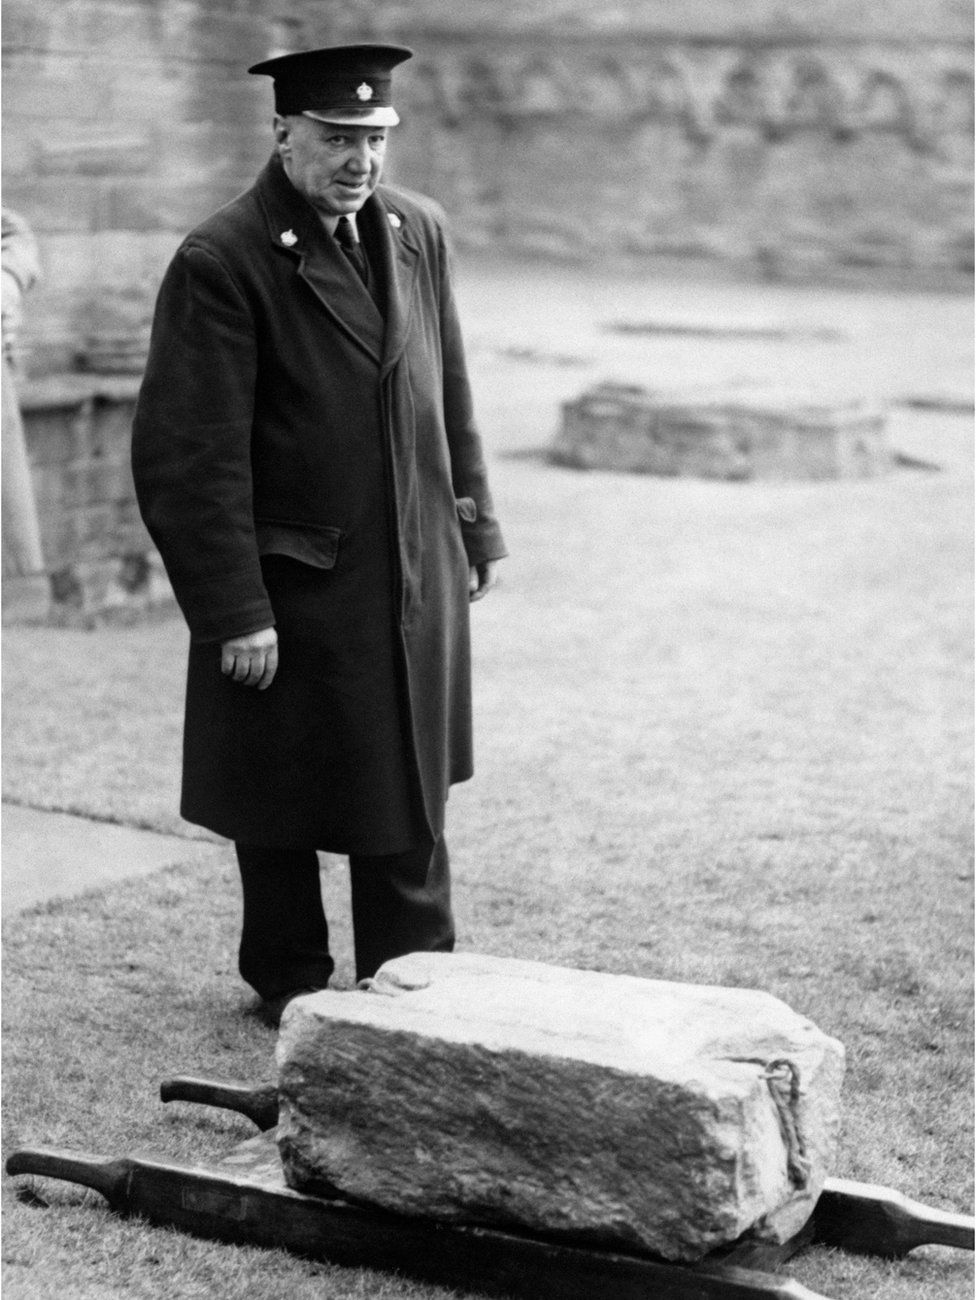 The Stone of Scone - the Scottish "Stone of Destiny" - missing from Westminster Abbey since Christmas Day, in the custody of James Wiseheart, Custodian of Arbroath Abbey in Forfarshire, Scotland.